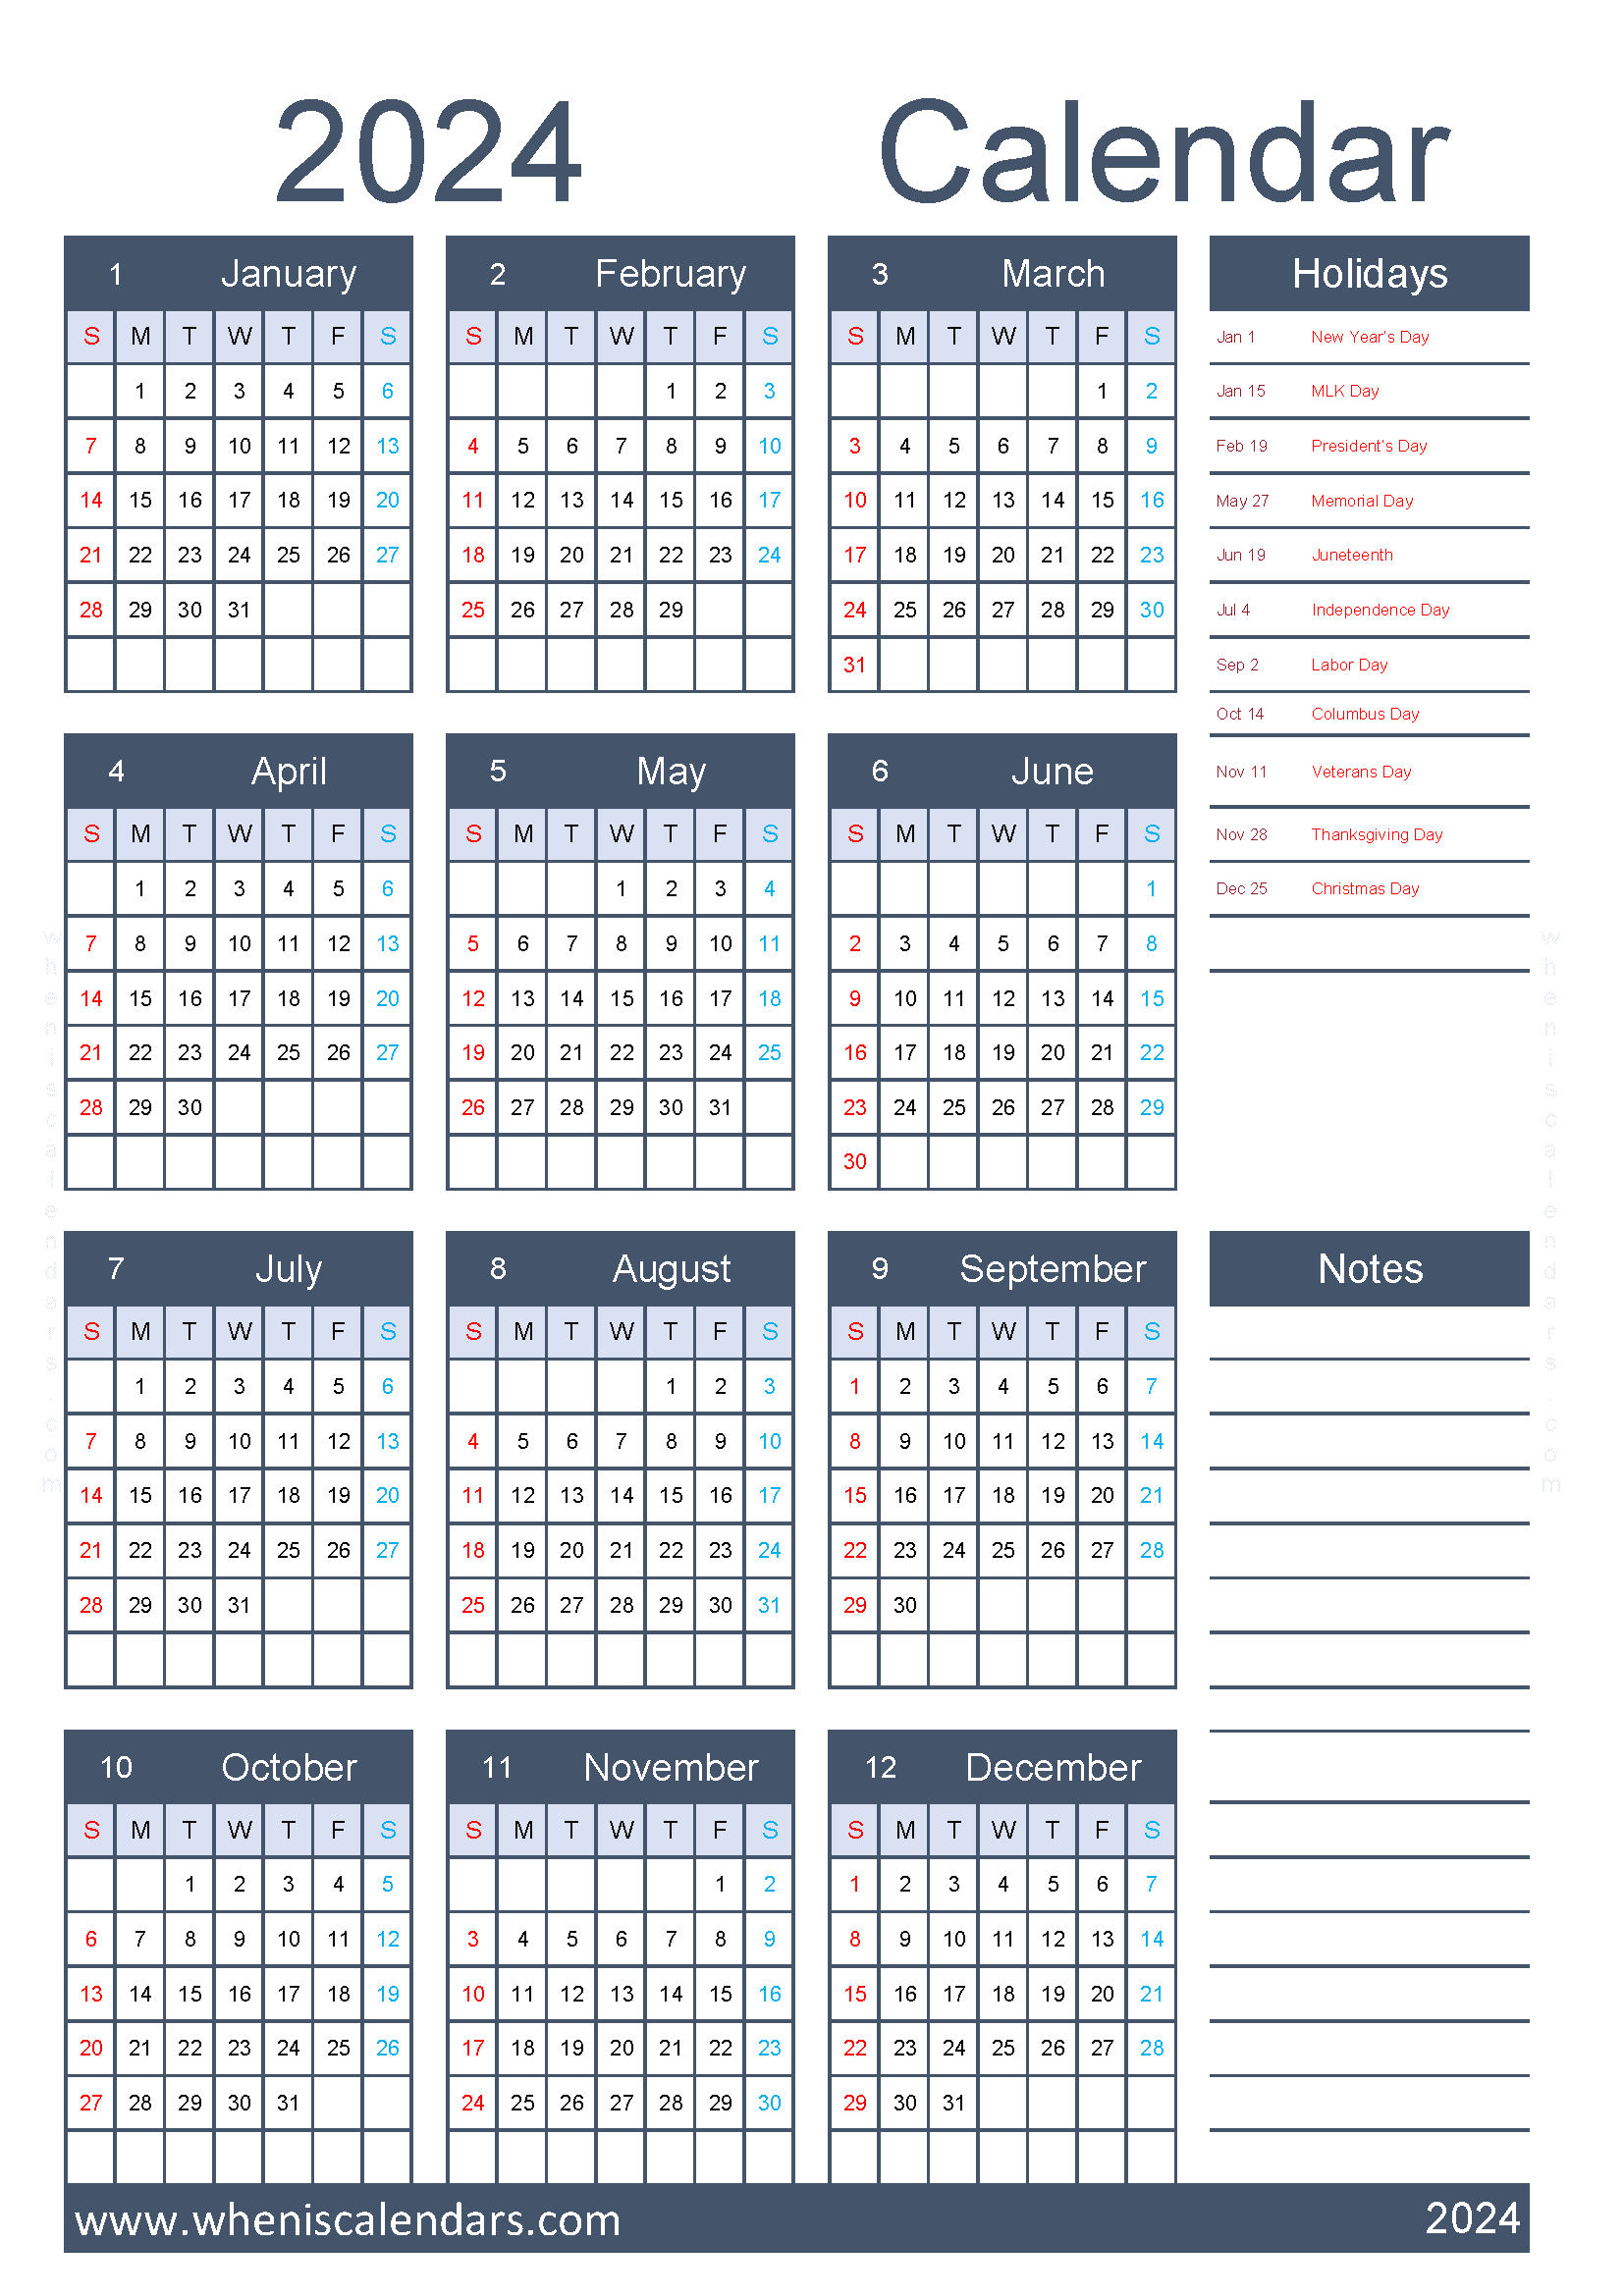 printable Calendar 2024 with Holidays free A4 in vertical portrait